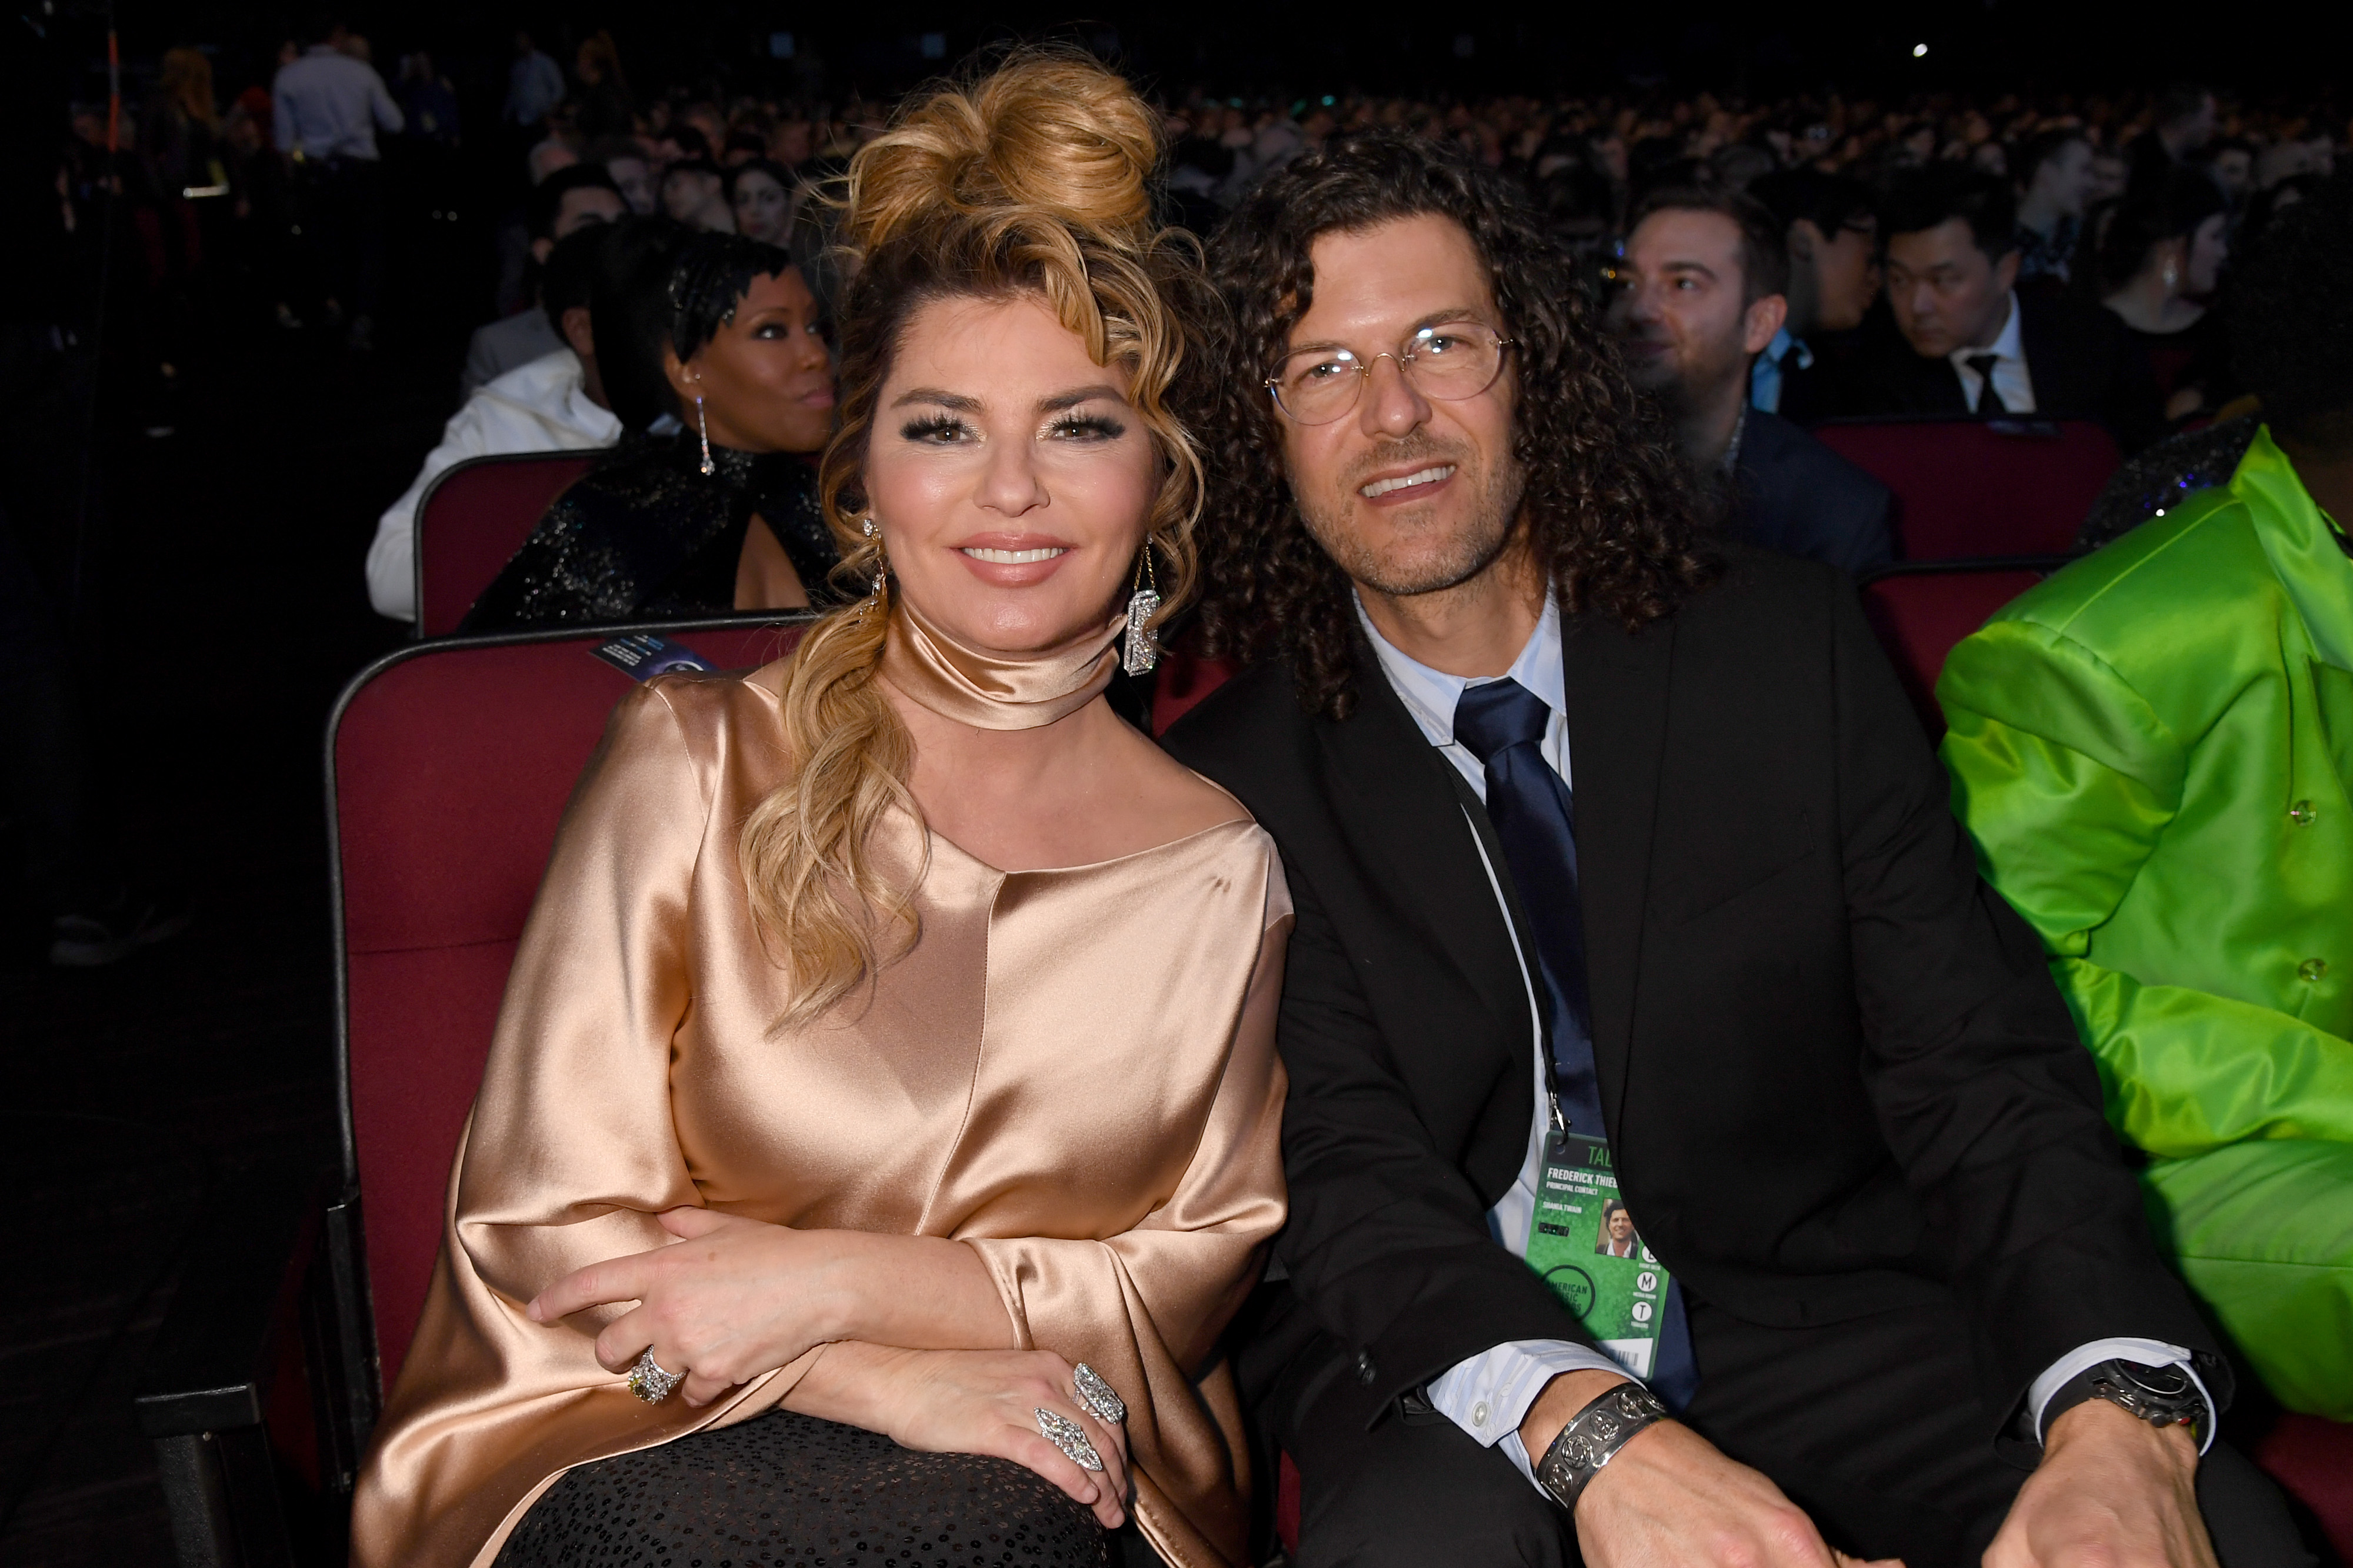 Shania Twain and Frédéric Thiébaud attend the 2019 American Music Awards at Microsoft Theater on November 24, 2019, in Los Angeles, California. | Source: Getty Images